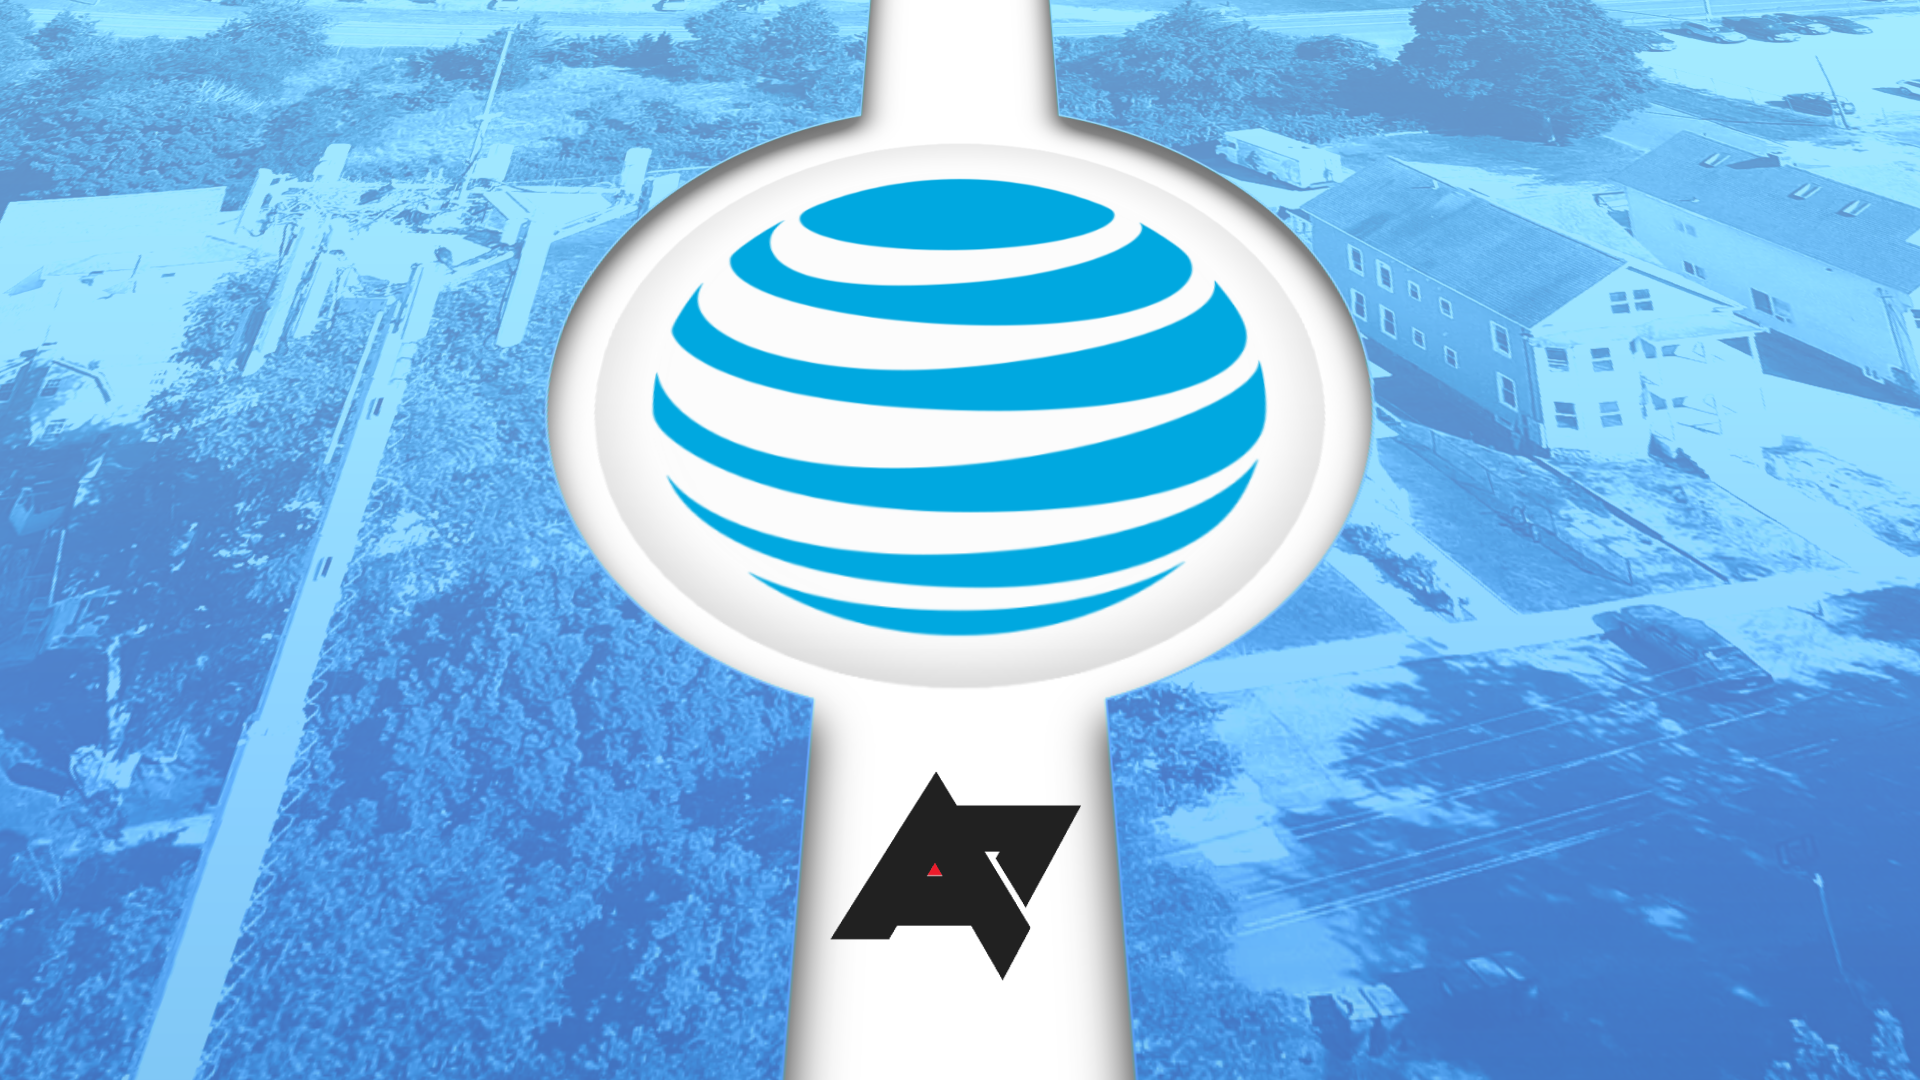 The AT&T logo with an image of a cell tower in the background.